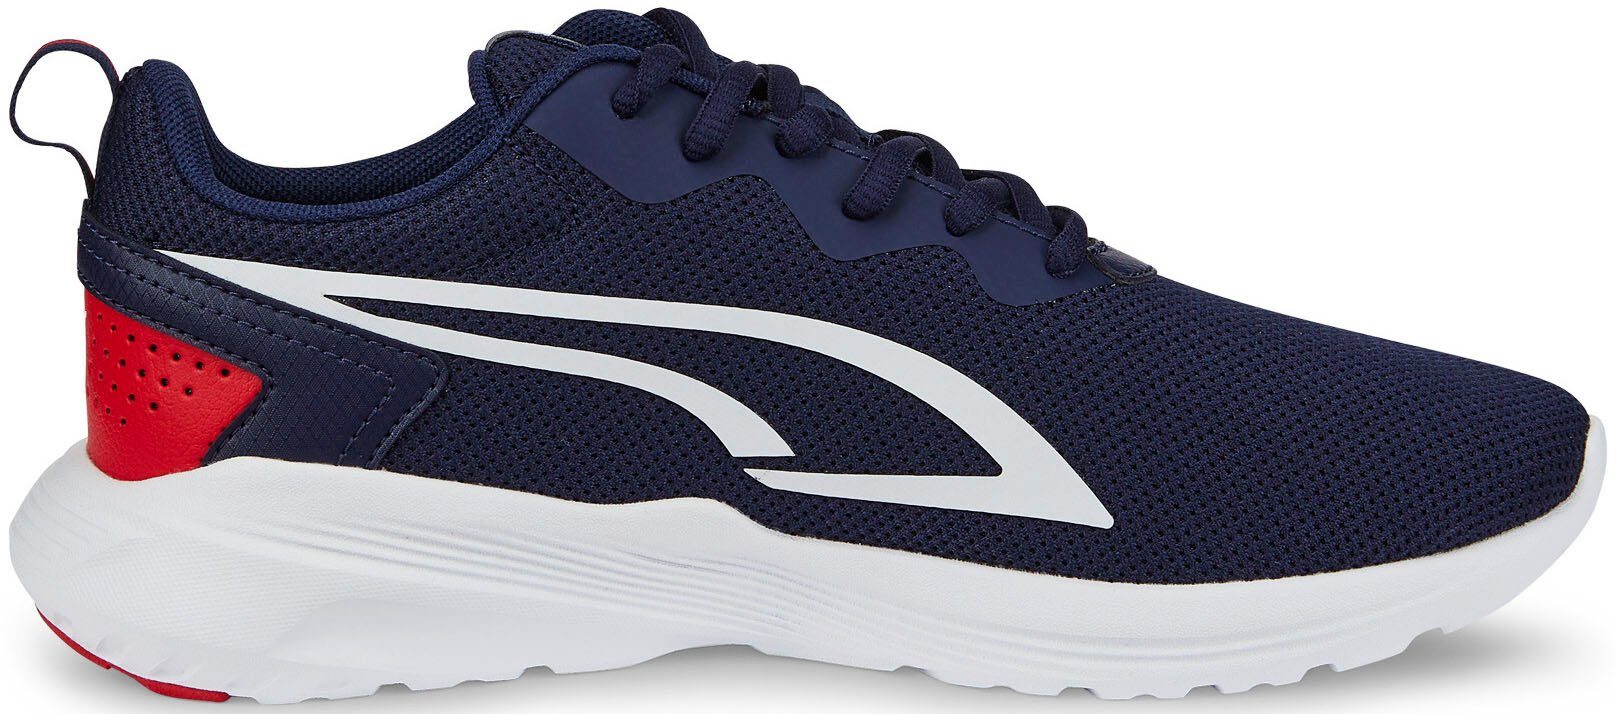 ALL-DAY ACTIVE PUMA JR Sneaker